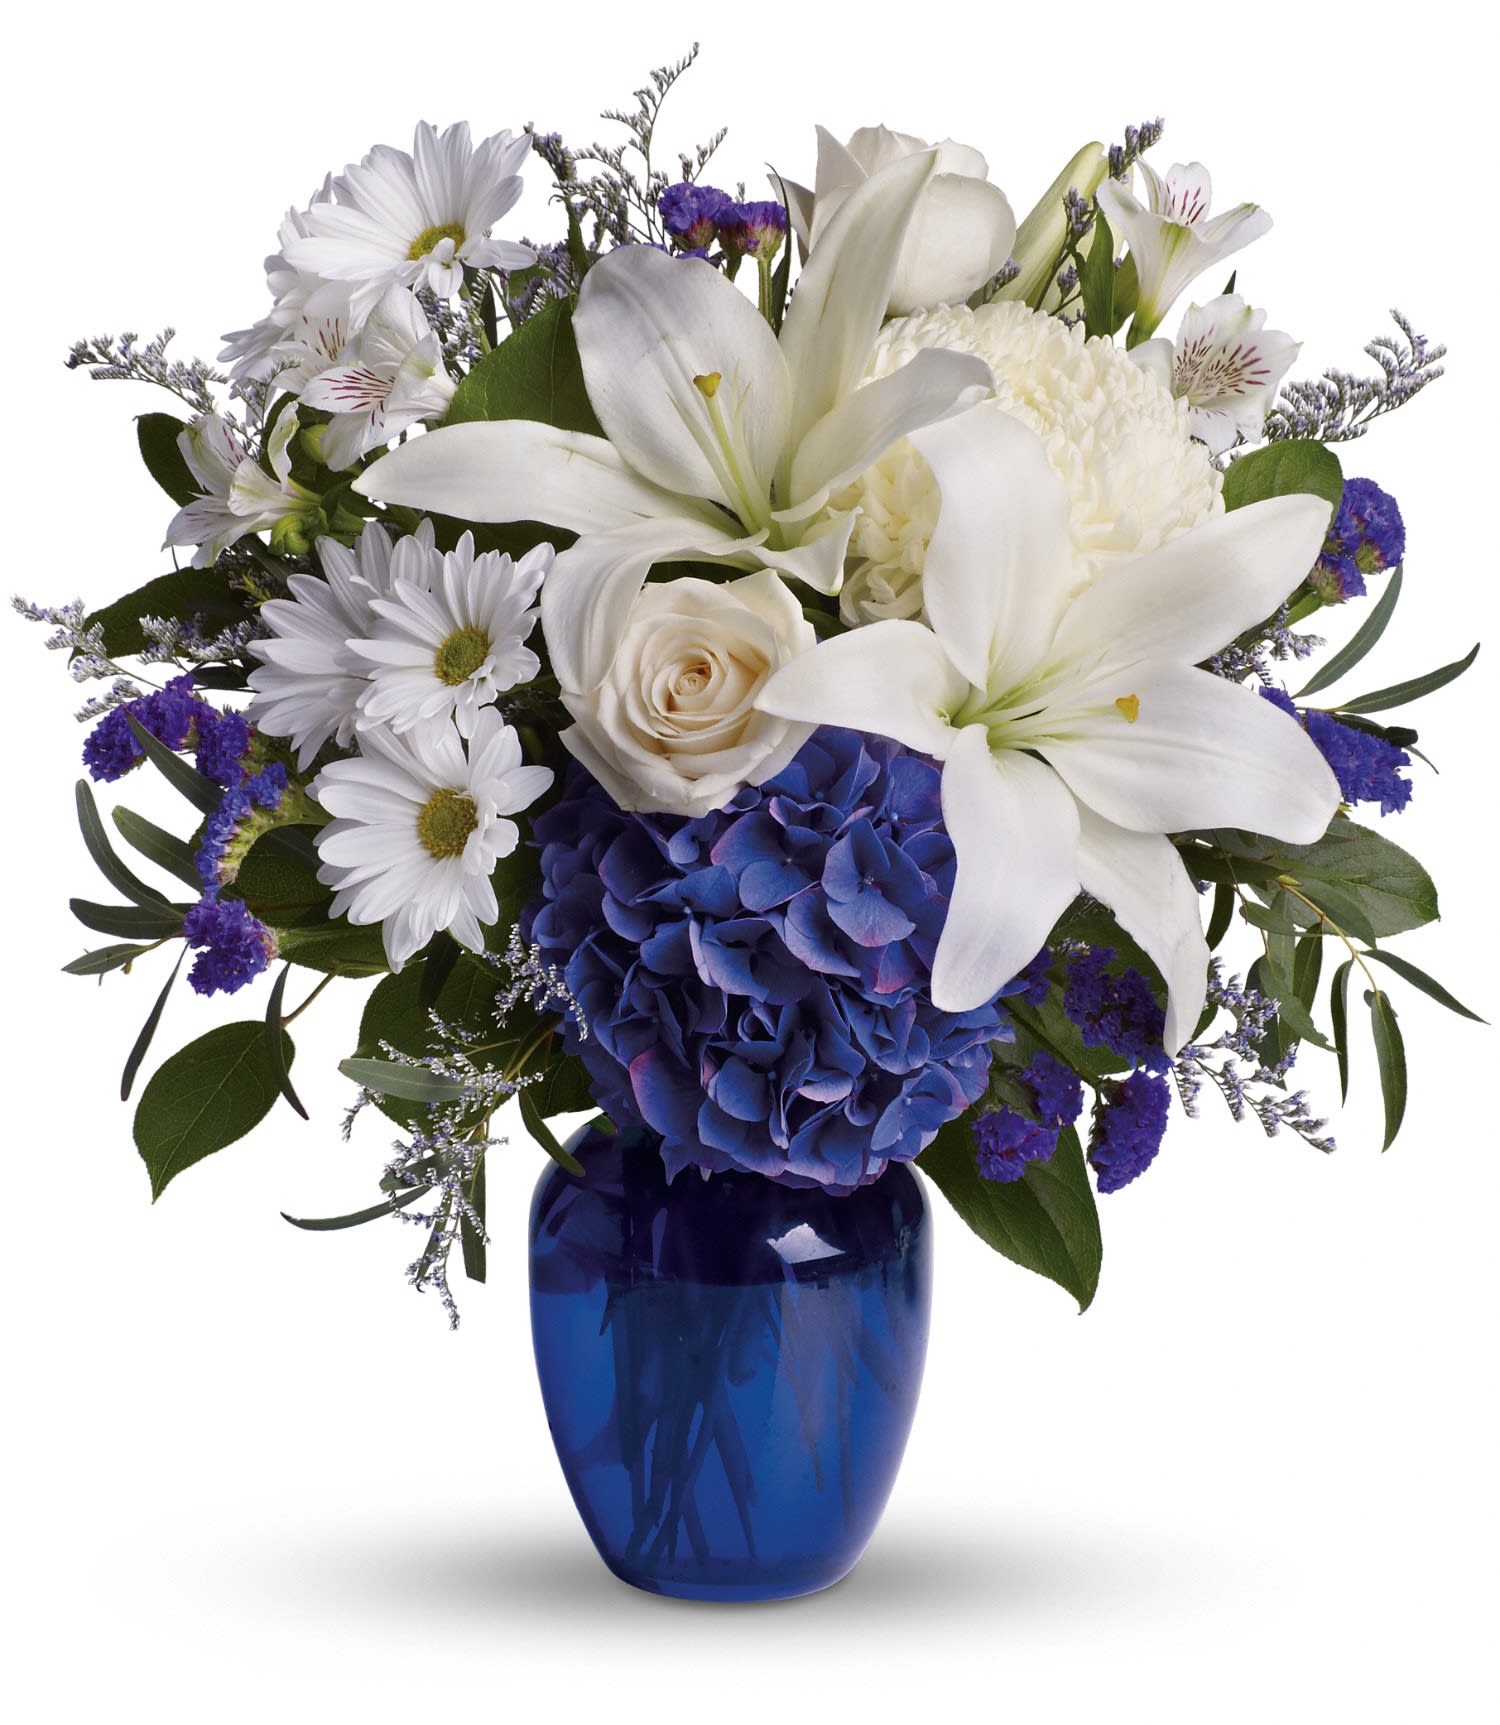 Beautiful in Blue - Beautiful blooms such as blue hydrangea, creme roses, white lilies and white alstroemeria along with white chrysanthemums, eucalyptus, limonium and more are beautifully arranged in a dazzling cobalt blue vase. Approximately 16 1/2&quot; W x 18&quot; H